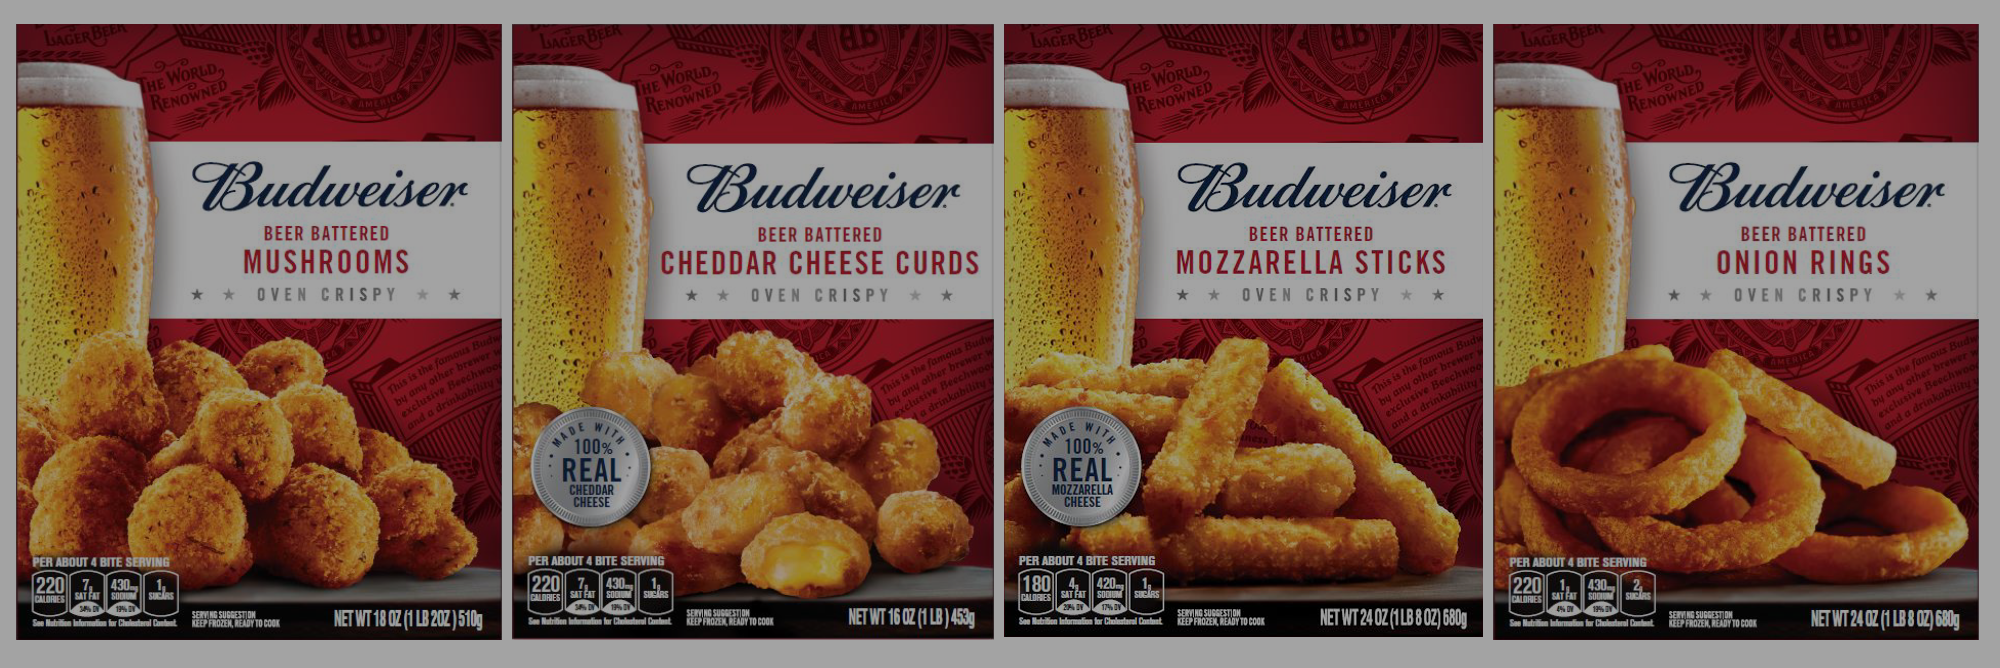 Farm Rich and ABInBev Deal For Budweiser Appetizer Line